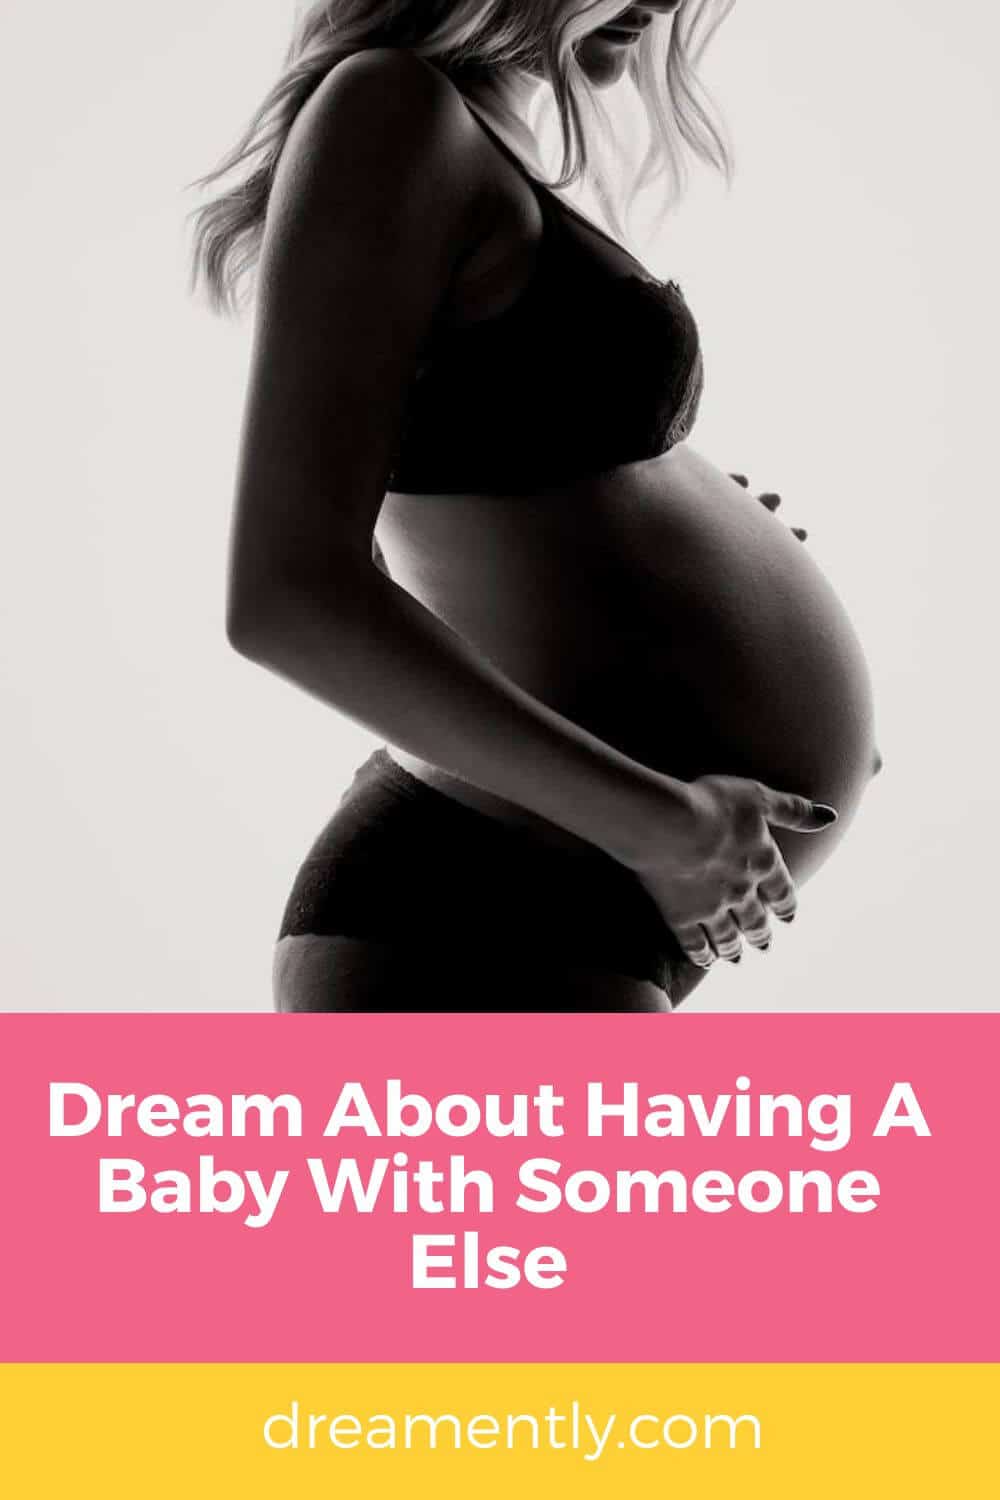 Dream About Having A Baby With Someone Else